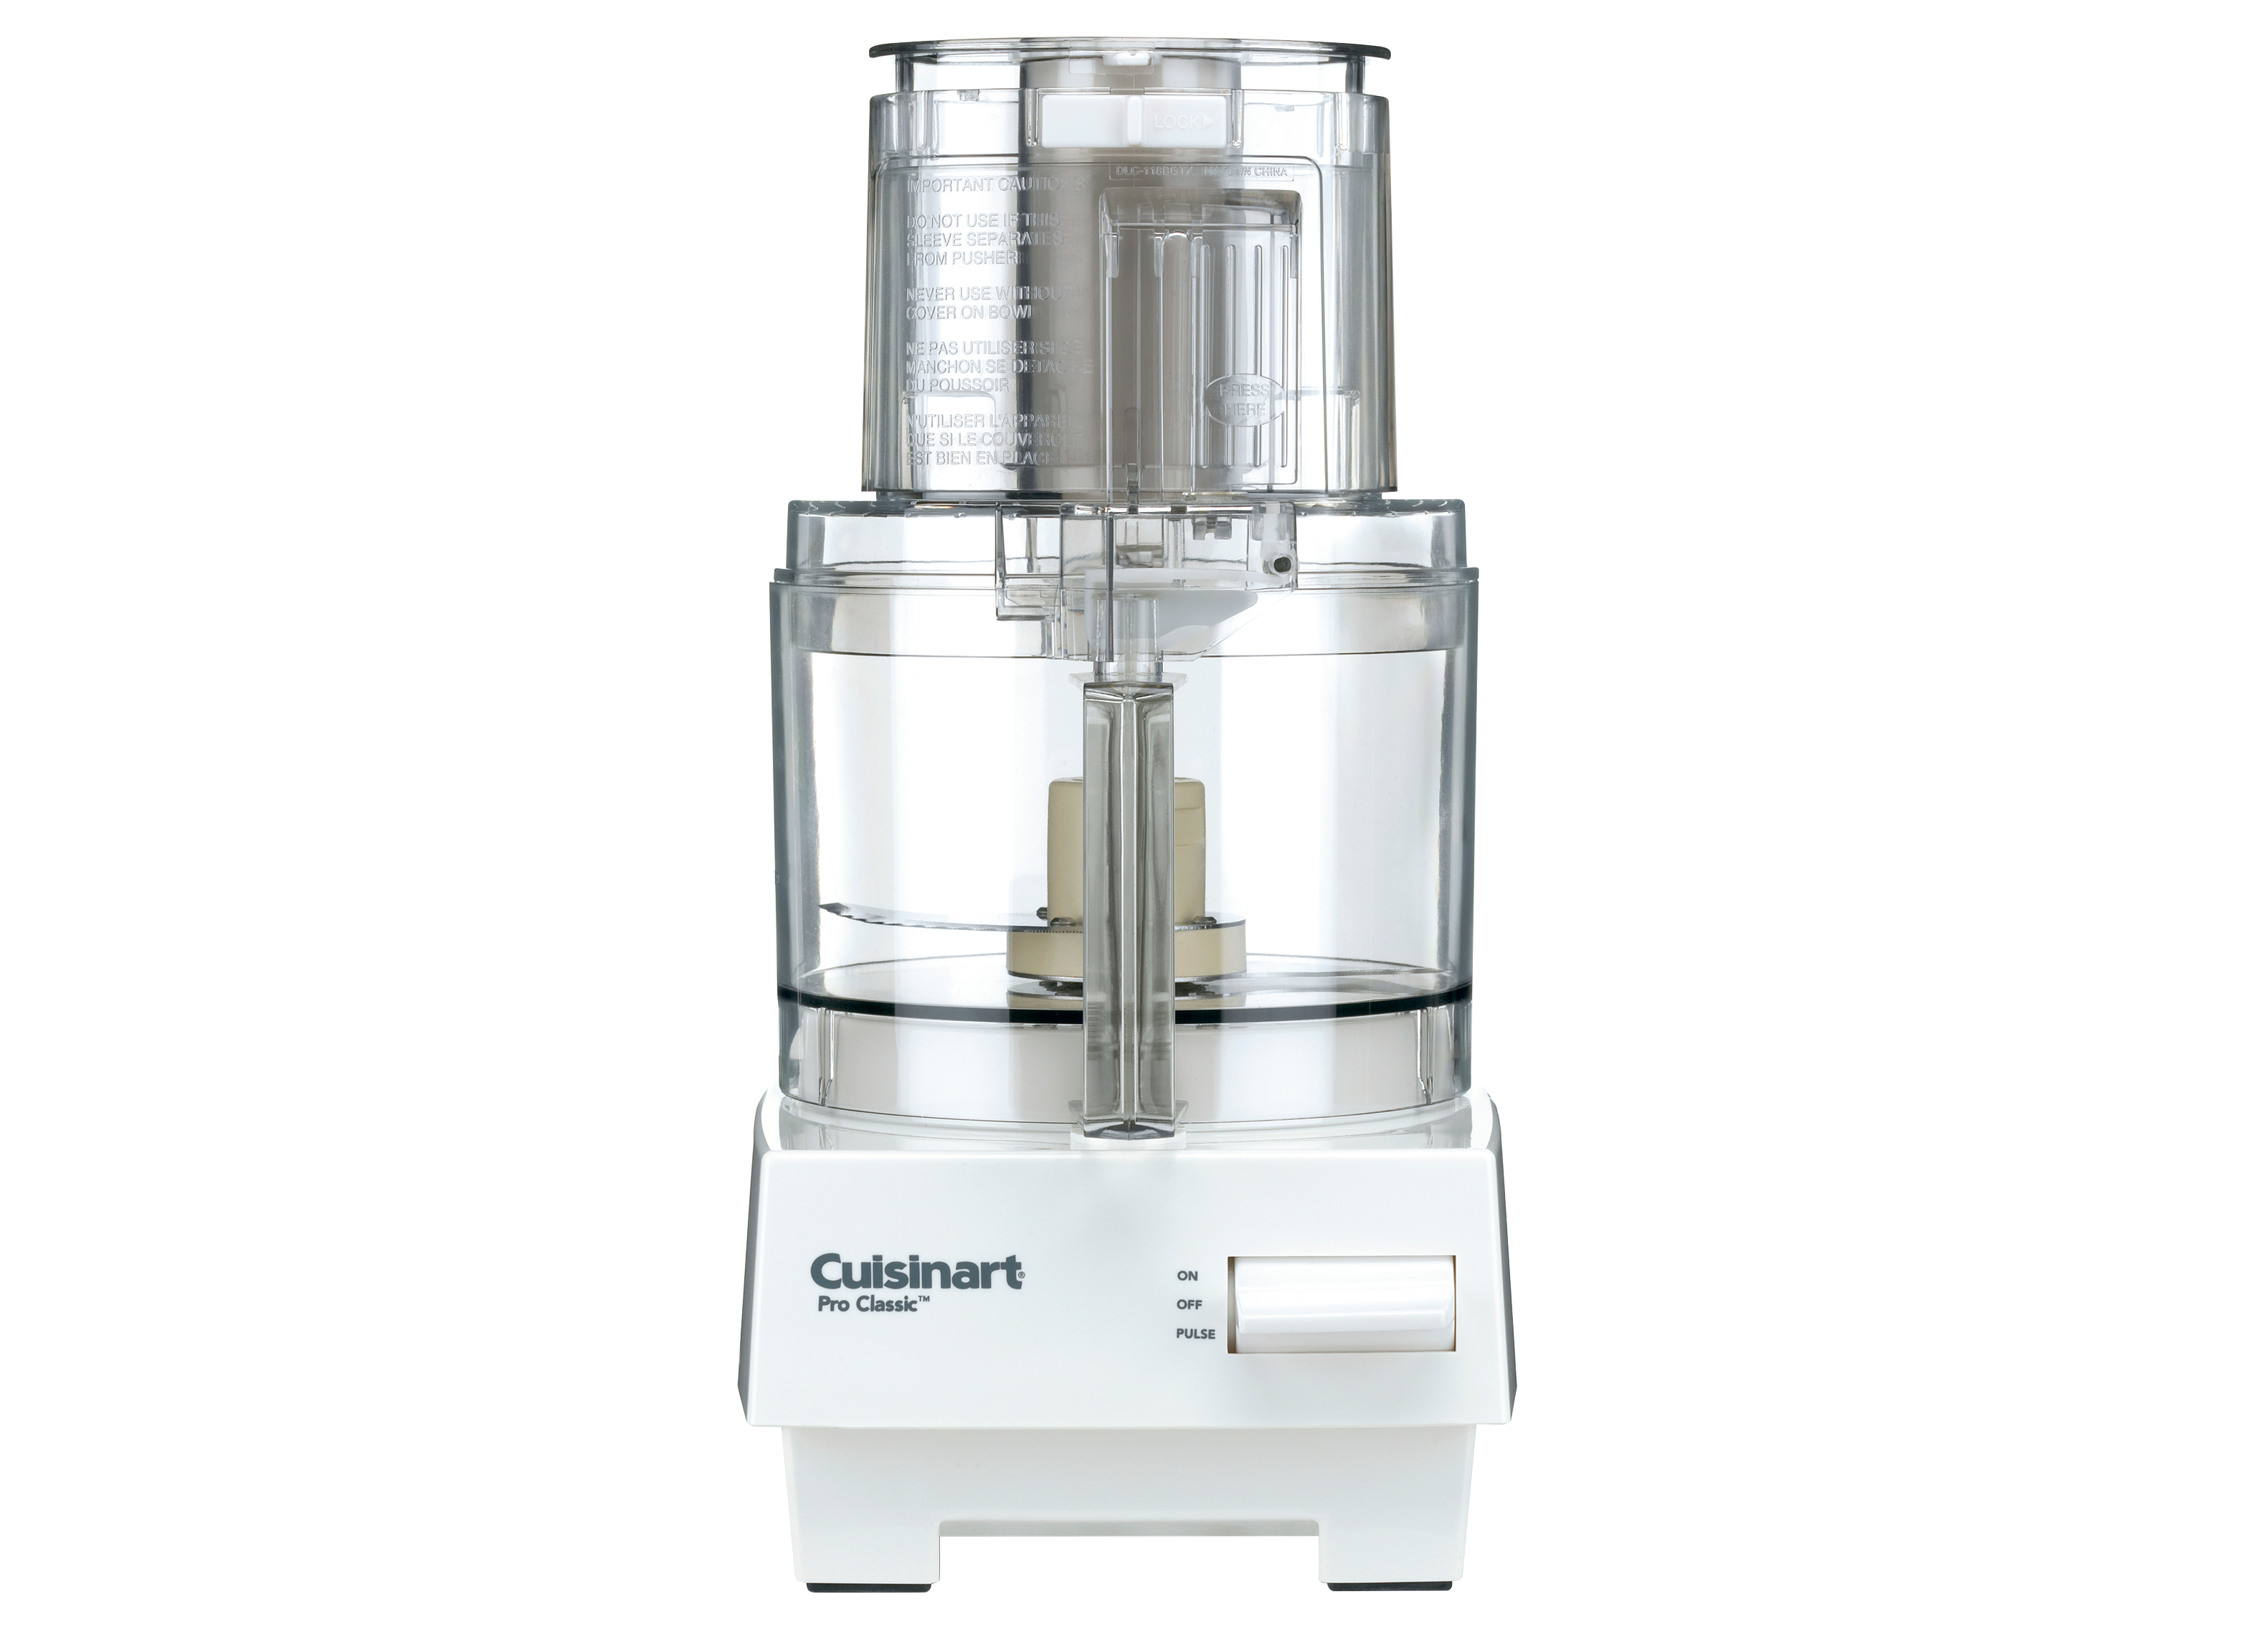 This Cuisinart Food Processor Has Been Our Top Pick for 10 Years. Here's  Why.